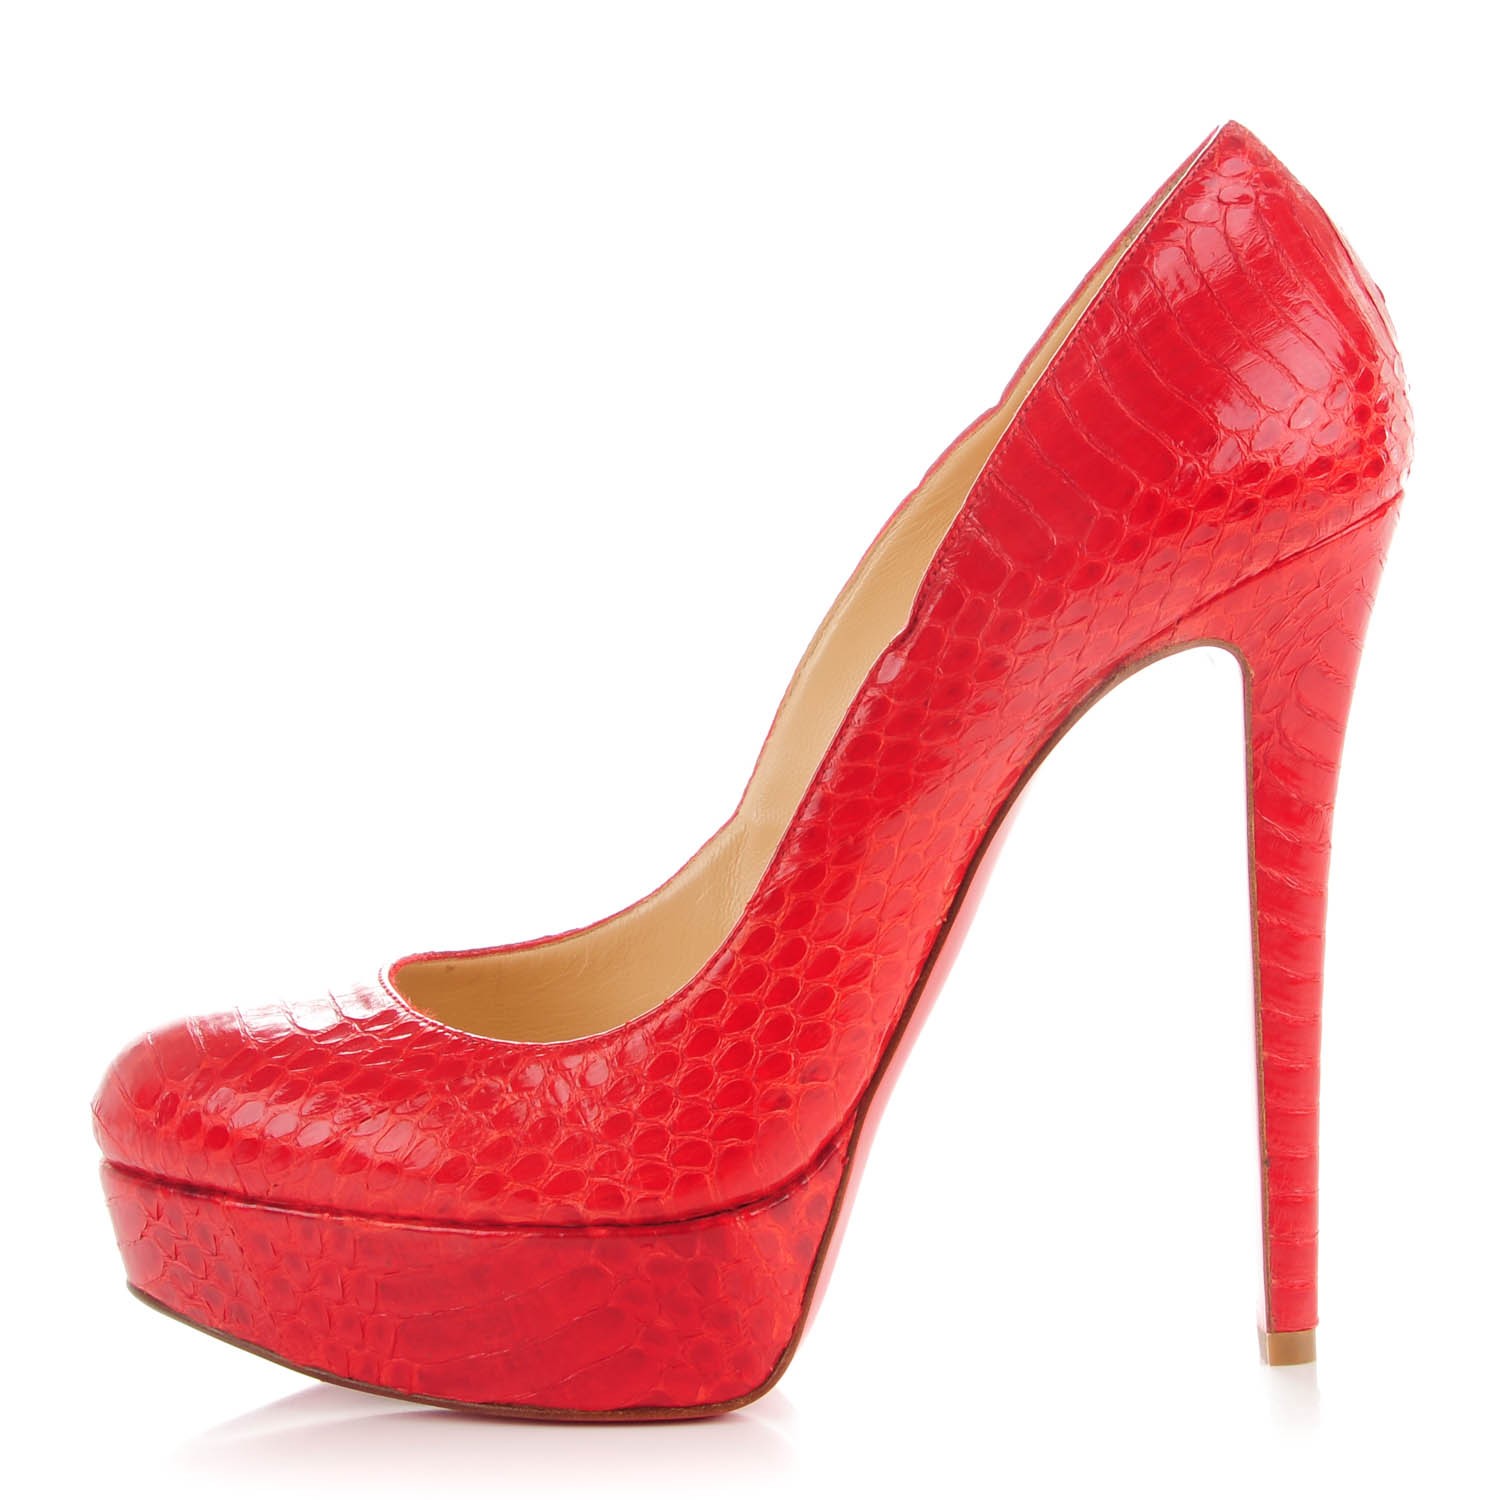 Blake Lively Style Guide: Blake Lively, a Christian Louboutin-a-holic, Pigalle Strass